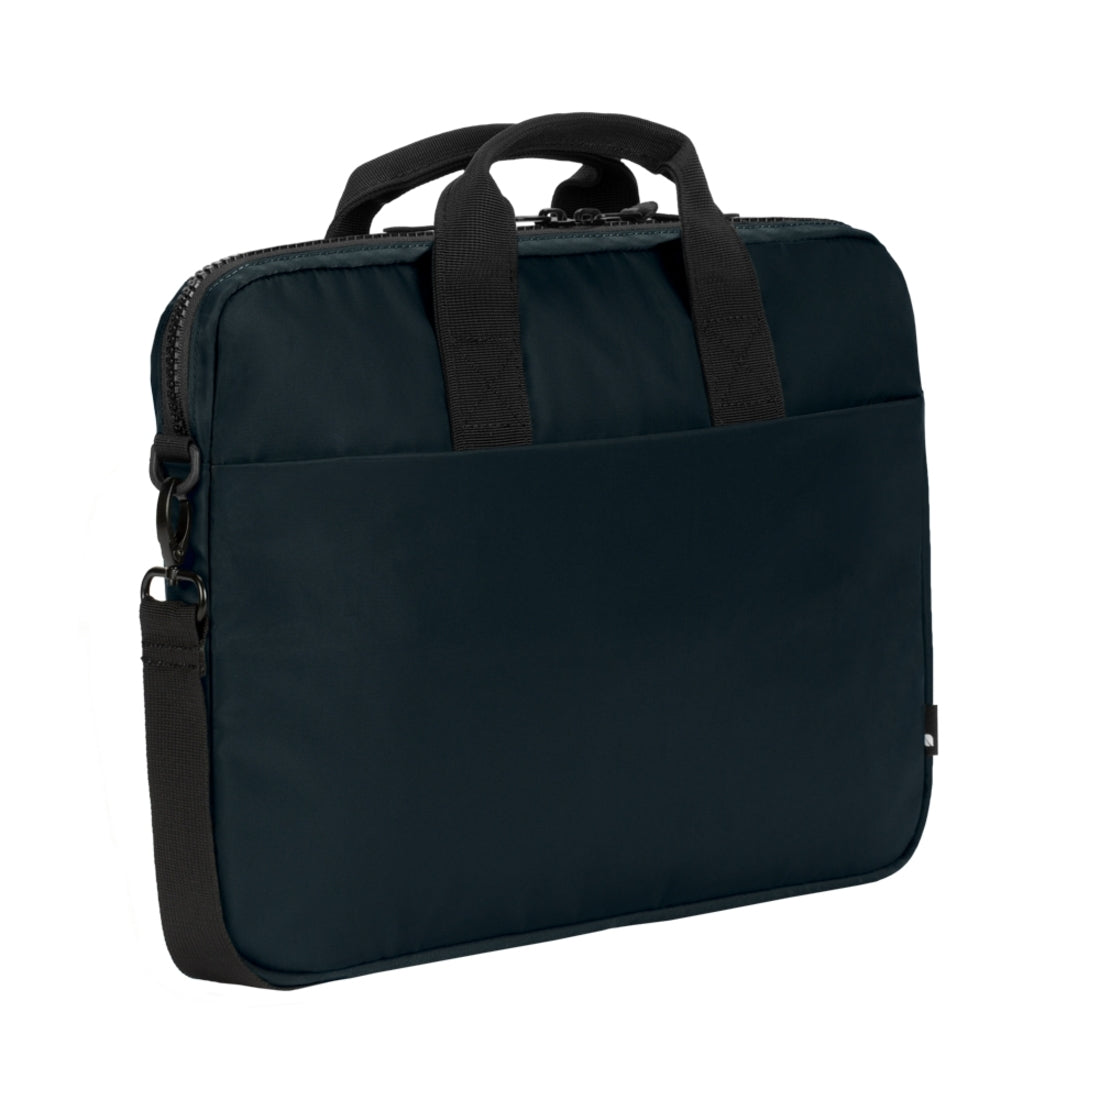 Incase Compass Brief Carrying Case (Briefcase) for 13" Apple iPhone iPad MacBook Pro - Navy